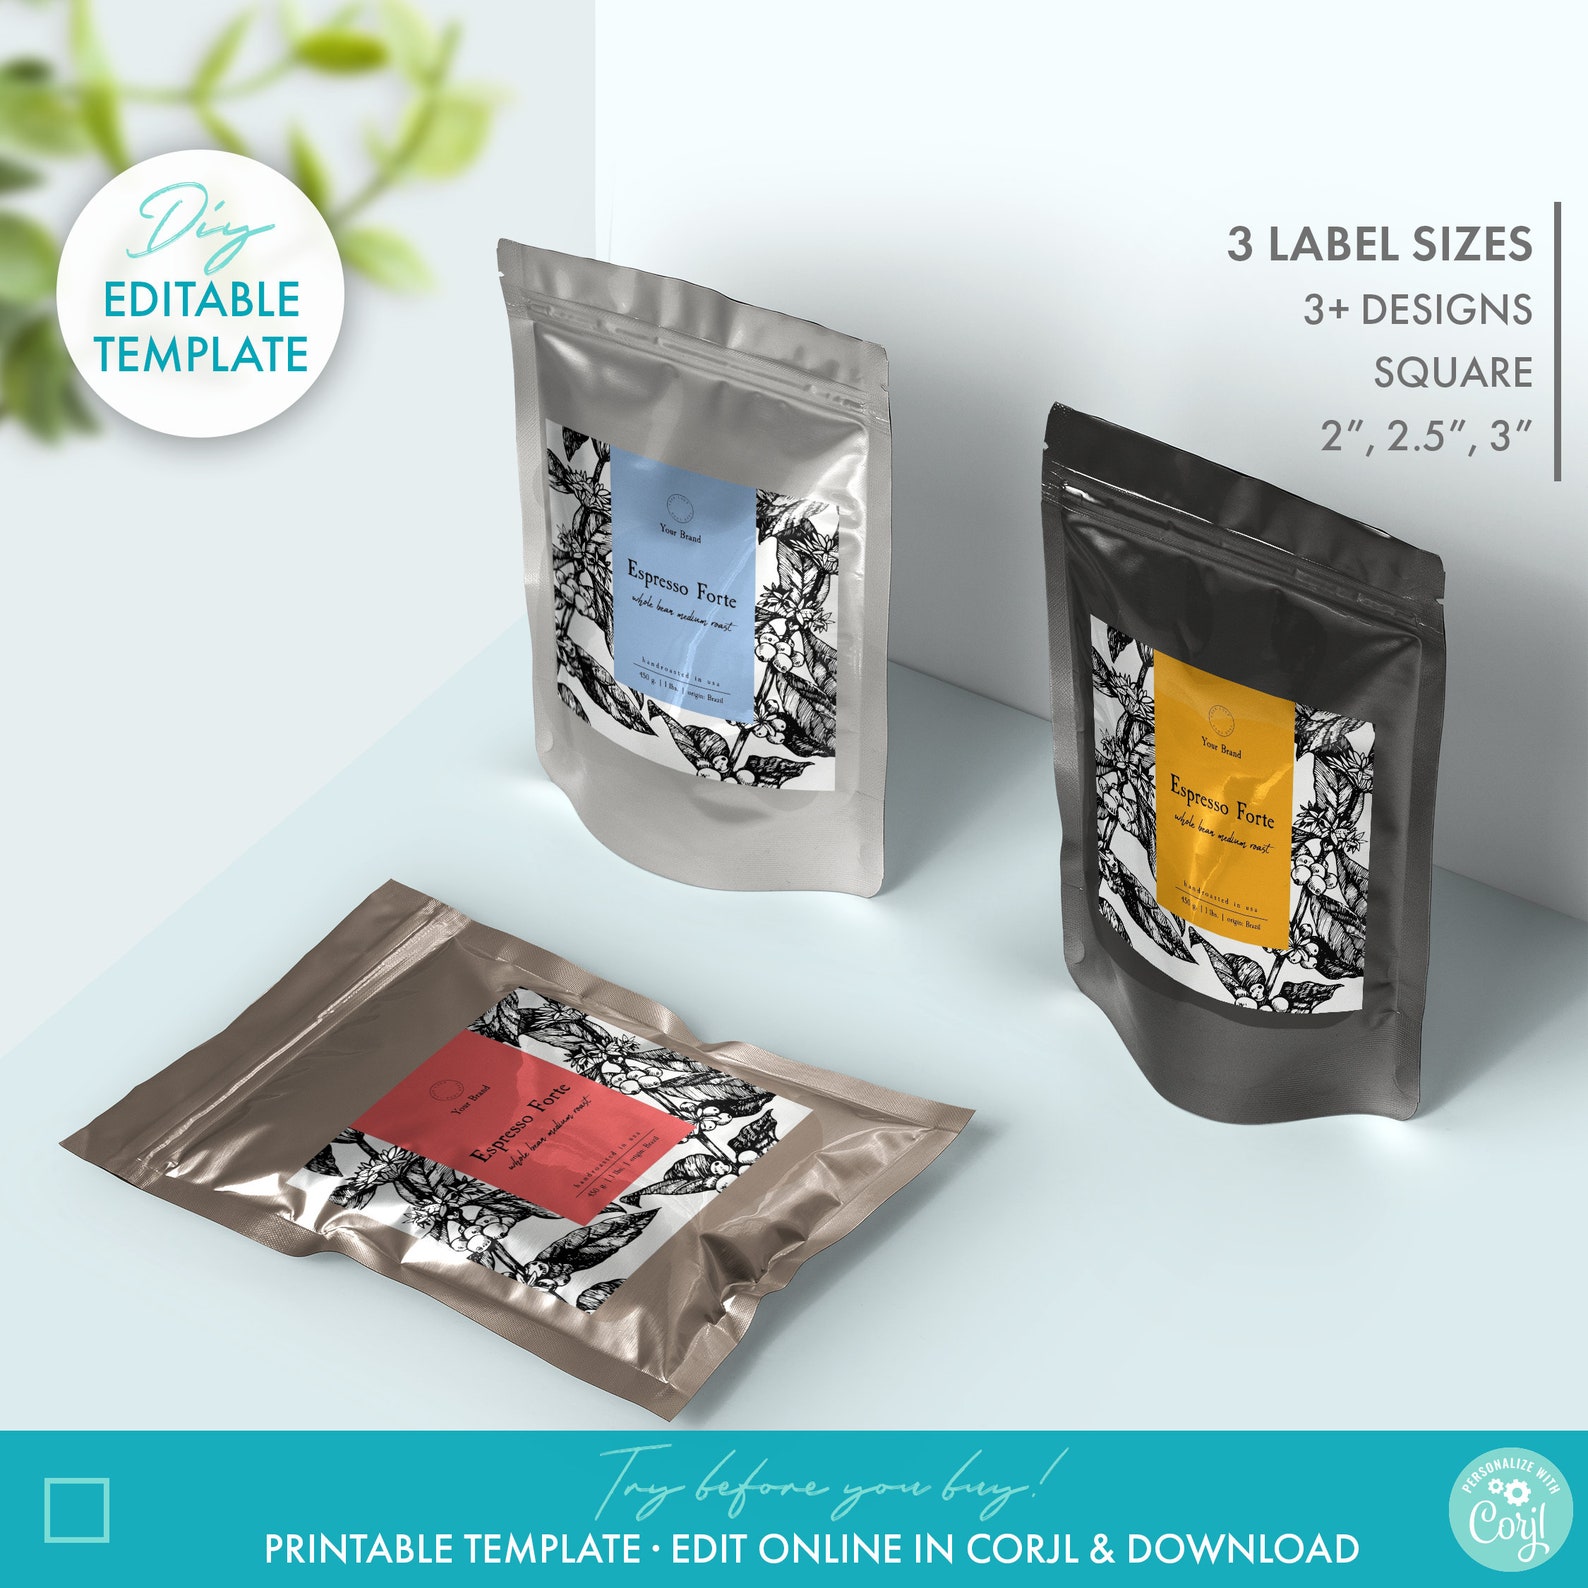 DIY Botanical Coffee Packaging Label Template 3 Sizes - Etsy